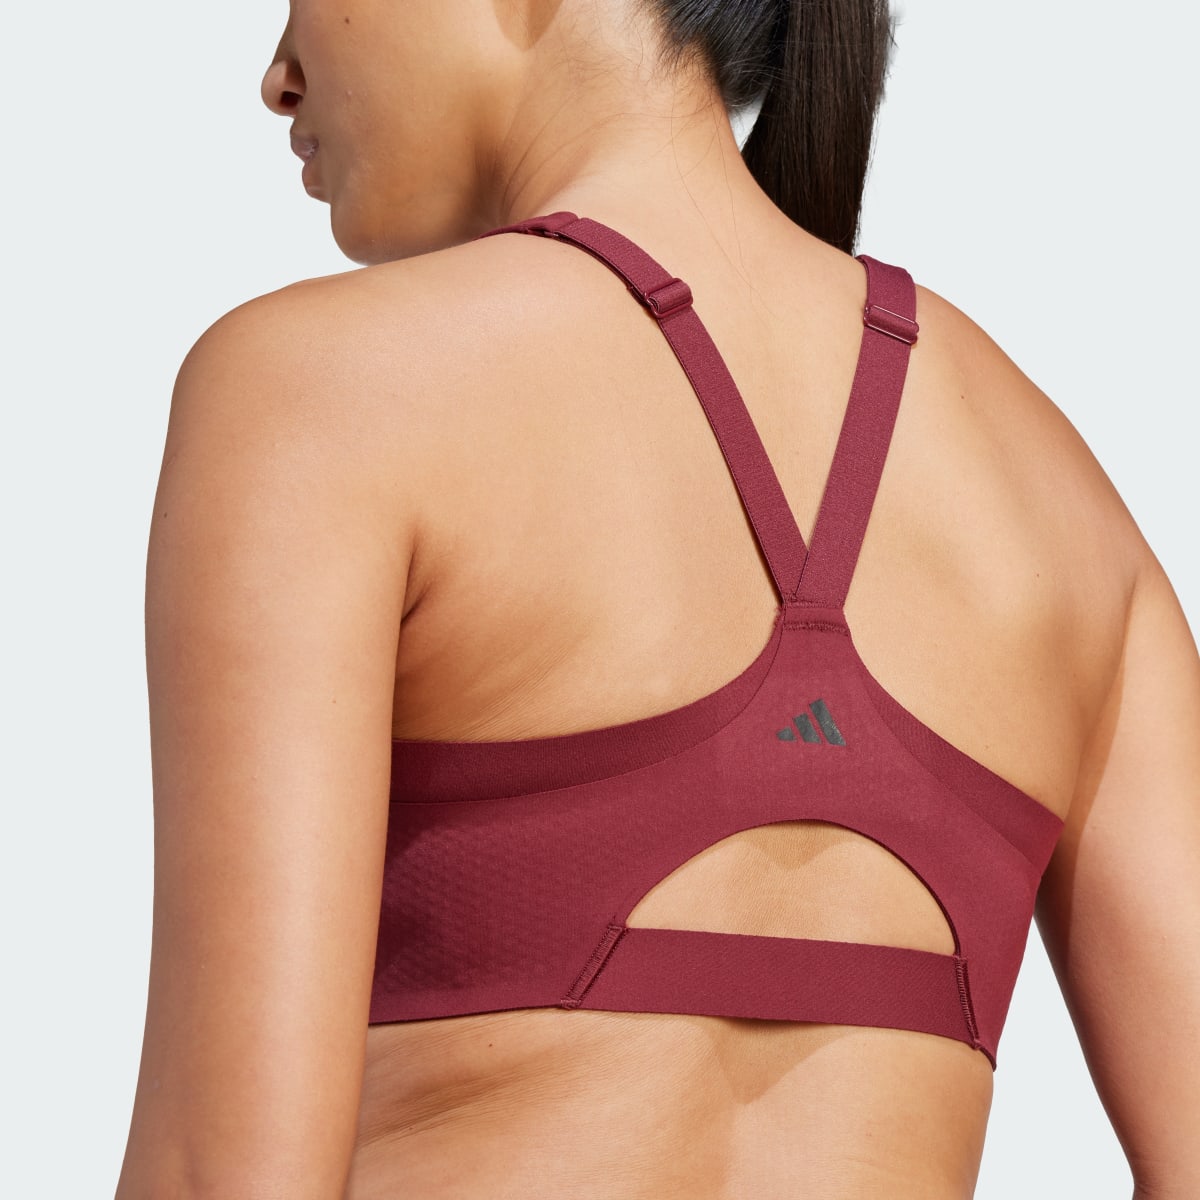 Adidas Brassière zippée maintien fort TLRD Impact Luxe. 8